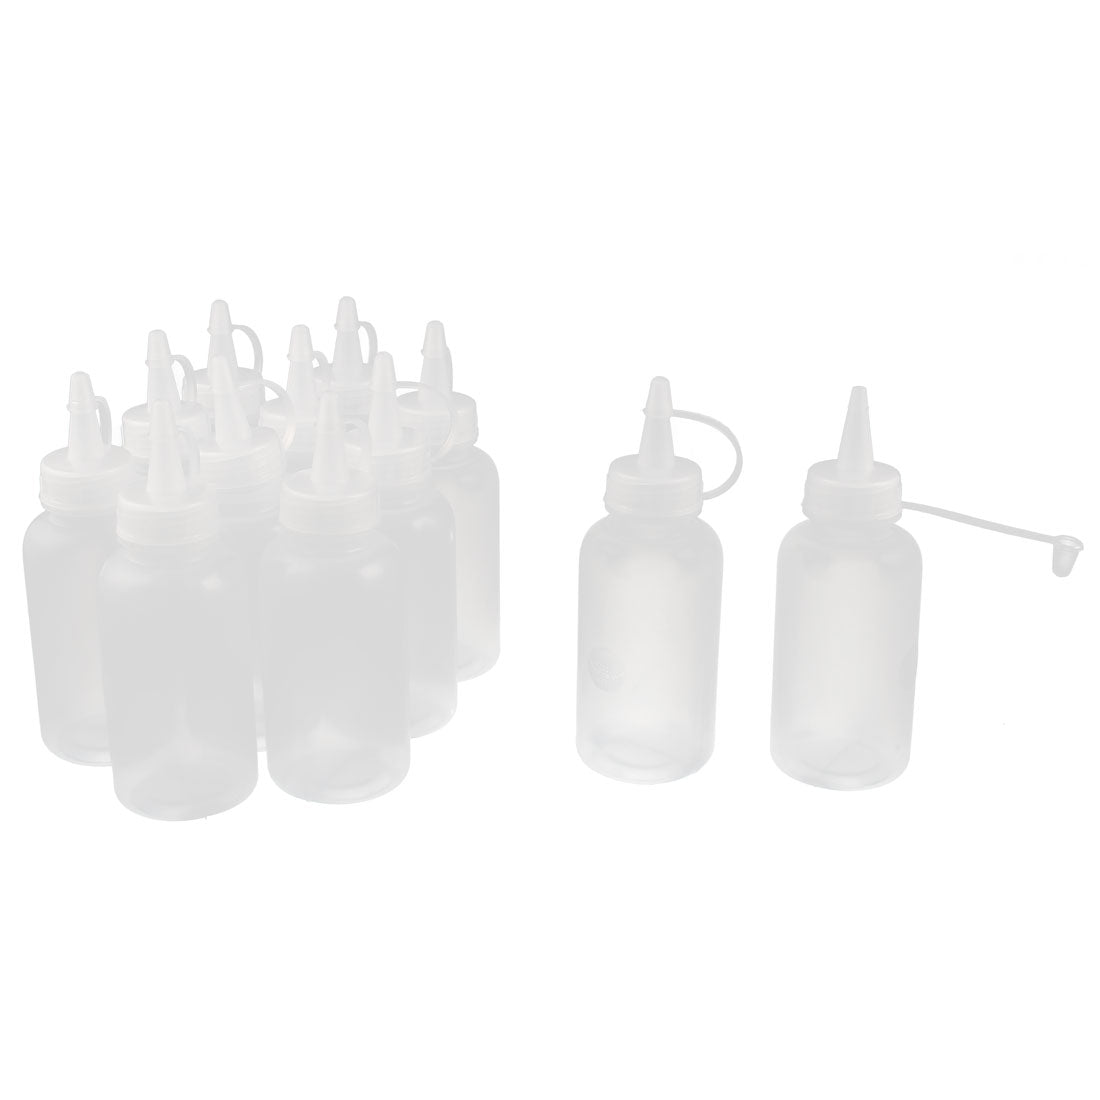 uxcell Uxcell Plastic Squeeze Bottle Measuring Storage Holder Clear White 100ml Capacity 12pcs